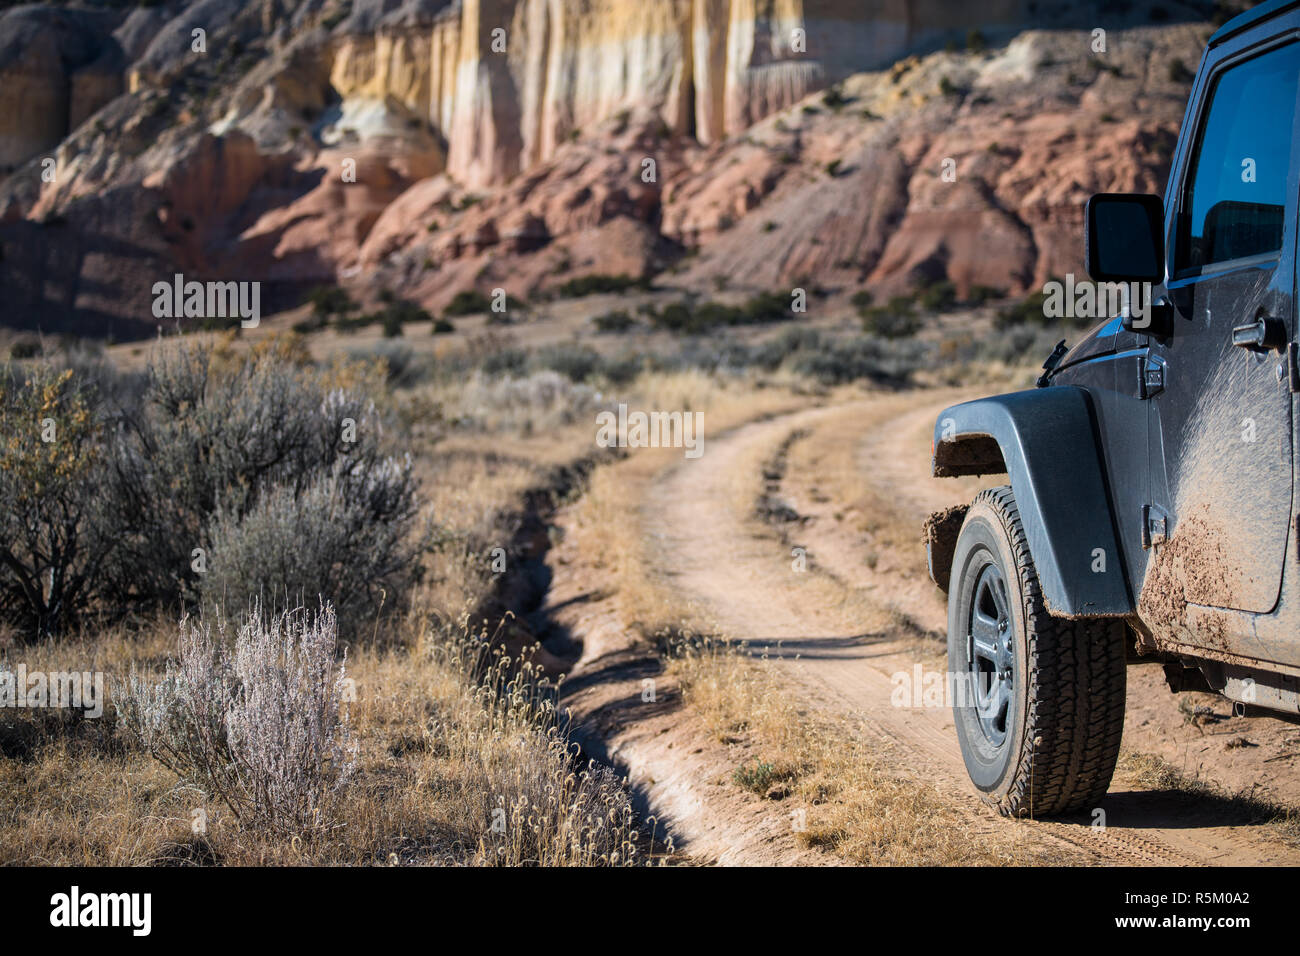 Muddy four-wheel drive vehicle on curving dirt road heading toward colorful cliffs in the high desert landscape in the Rio Chama canyon near Santa Fe, Stock Photo